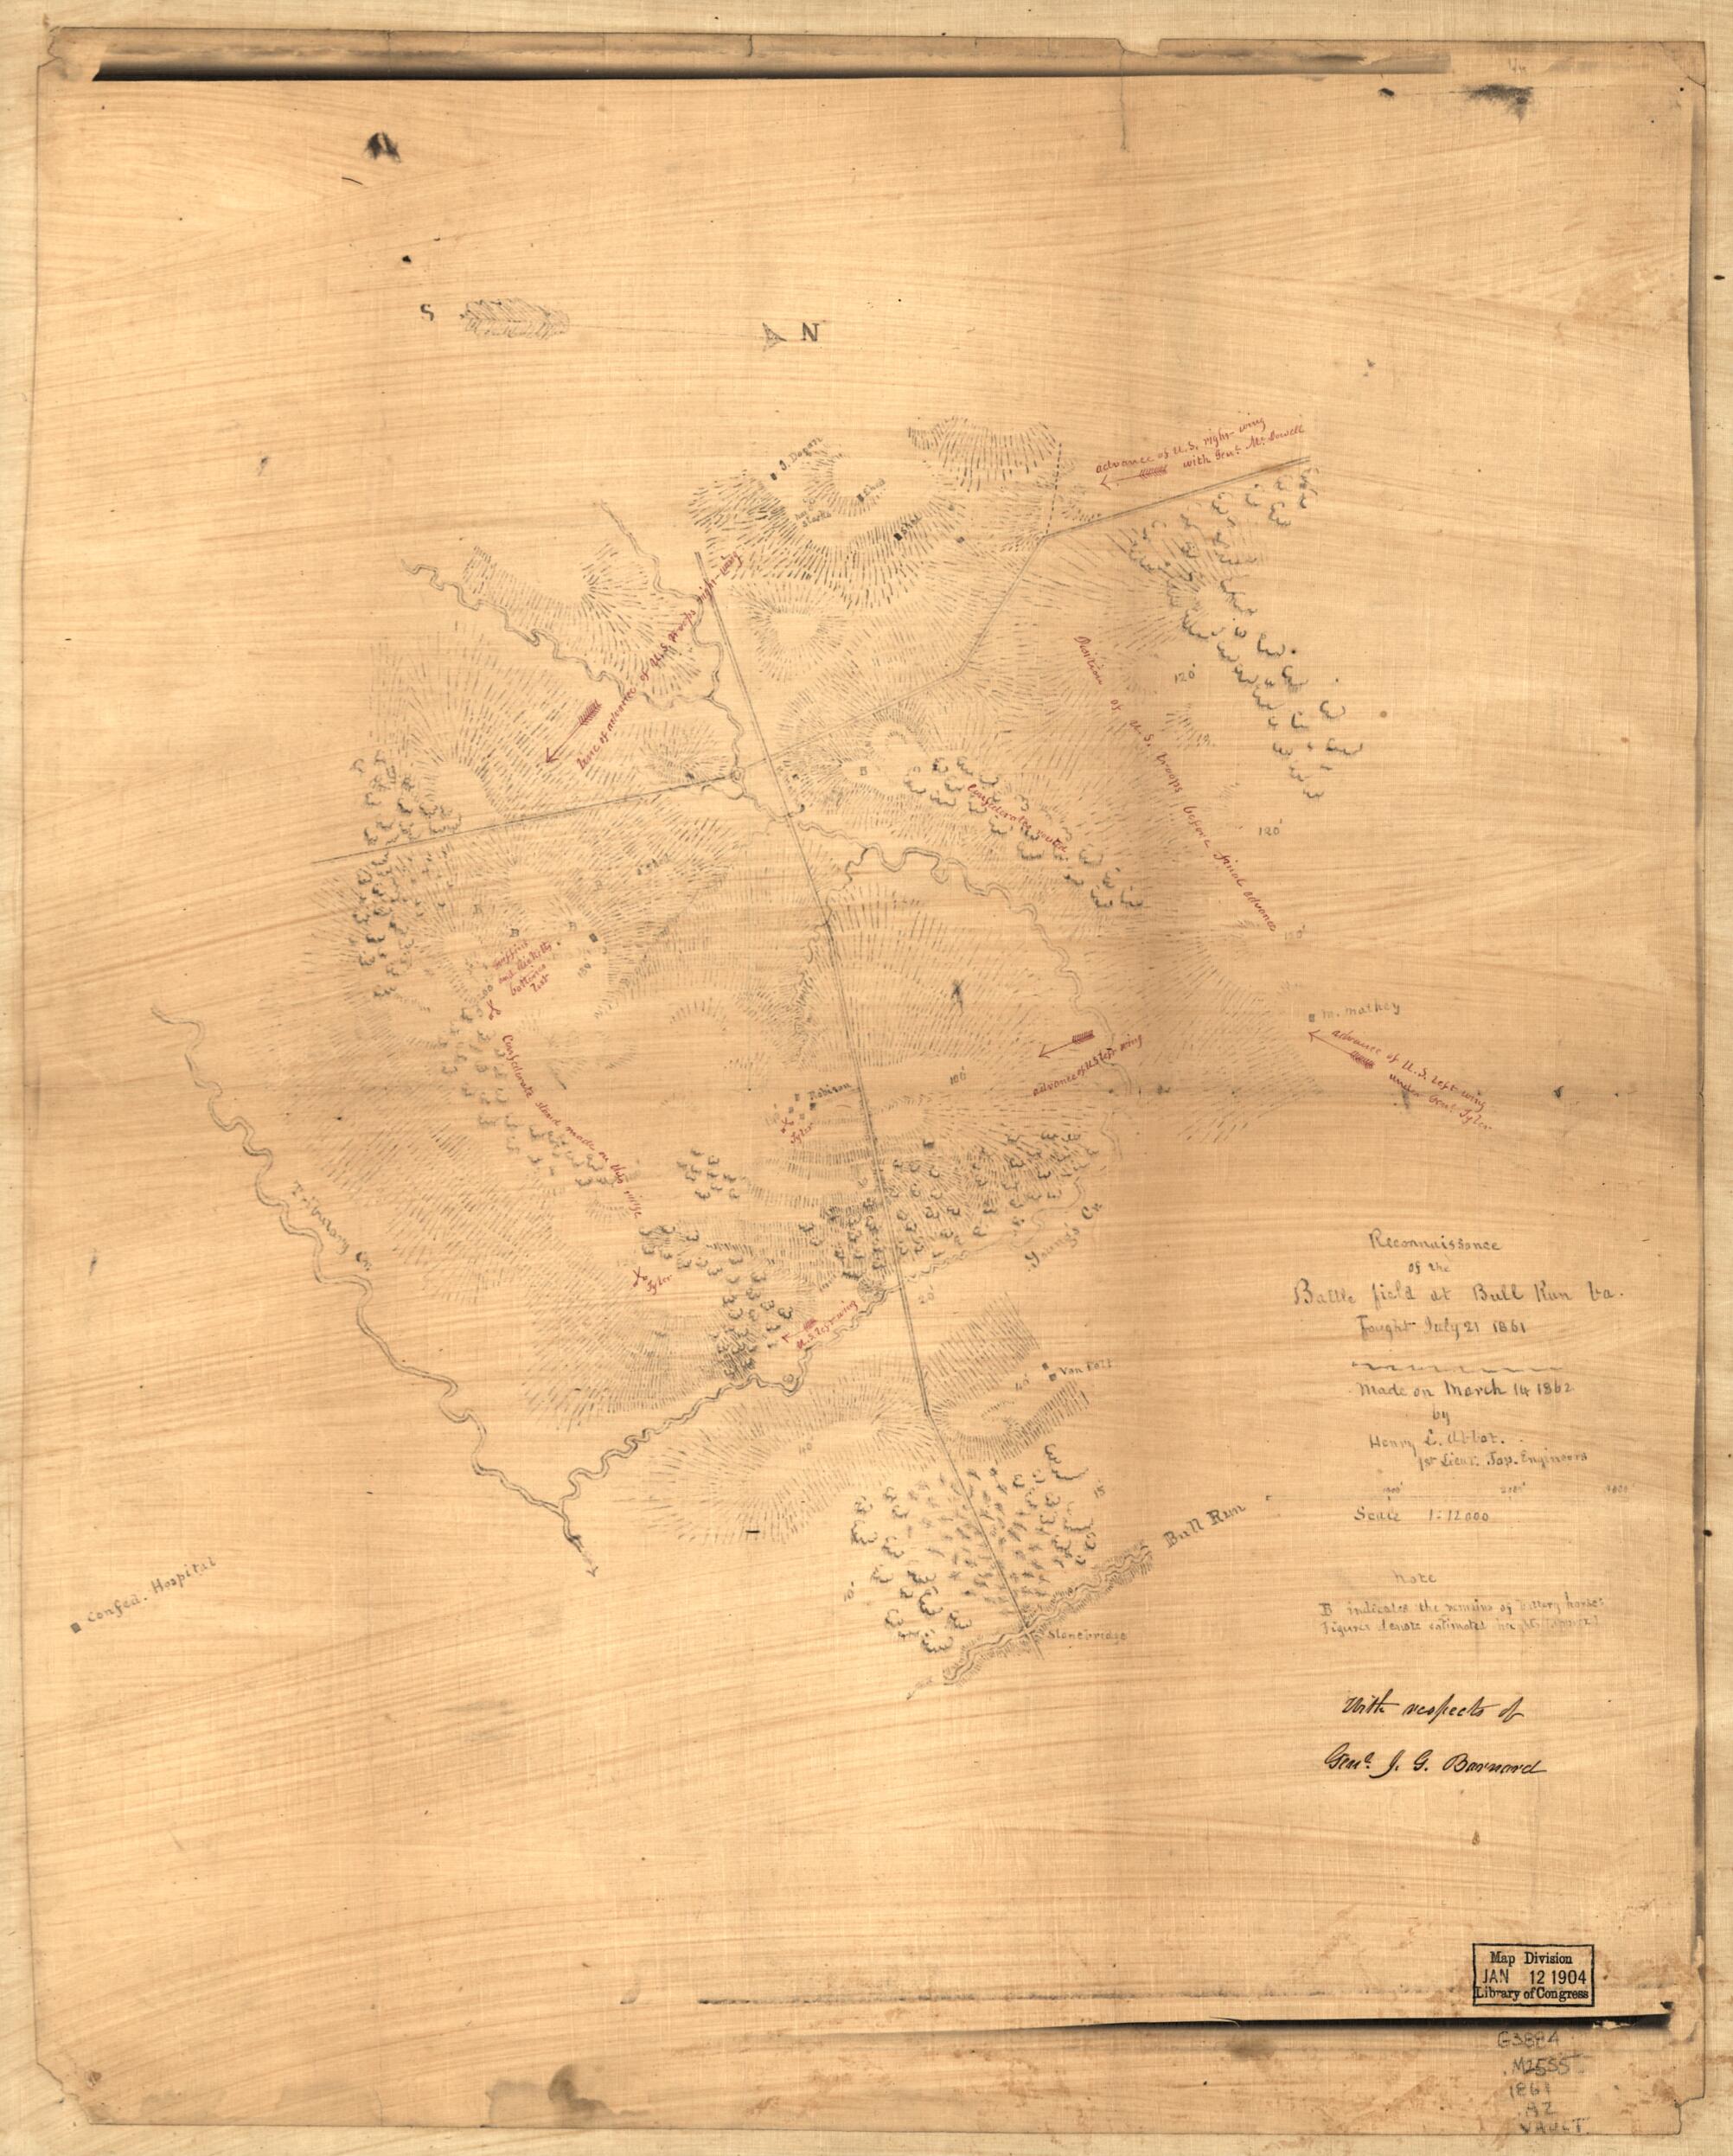 This old map of Reconnaissance of the Battle Field at Bull Run, Va., Fought July 21, 1861 from 1862 was created by Henry L. Abbot in 1862